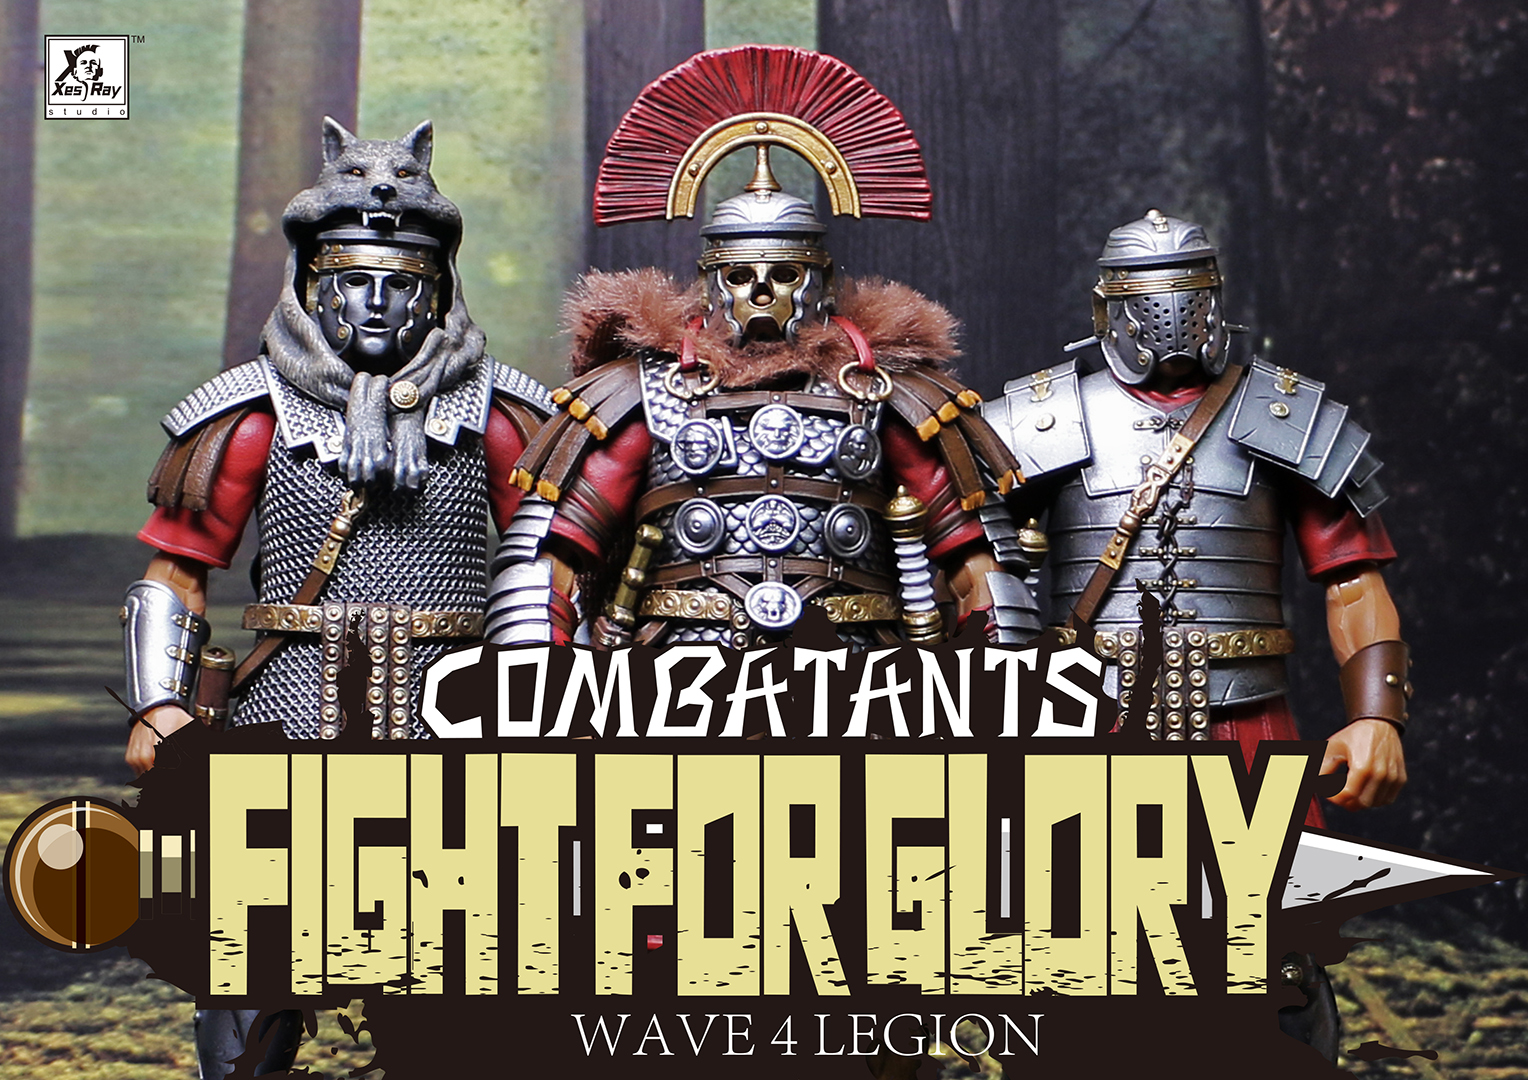 get ALL of WAVE4 Legion